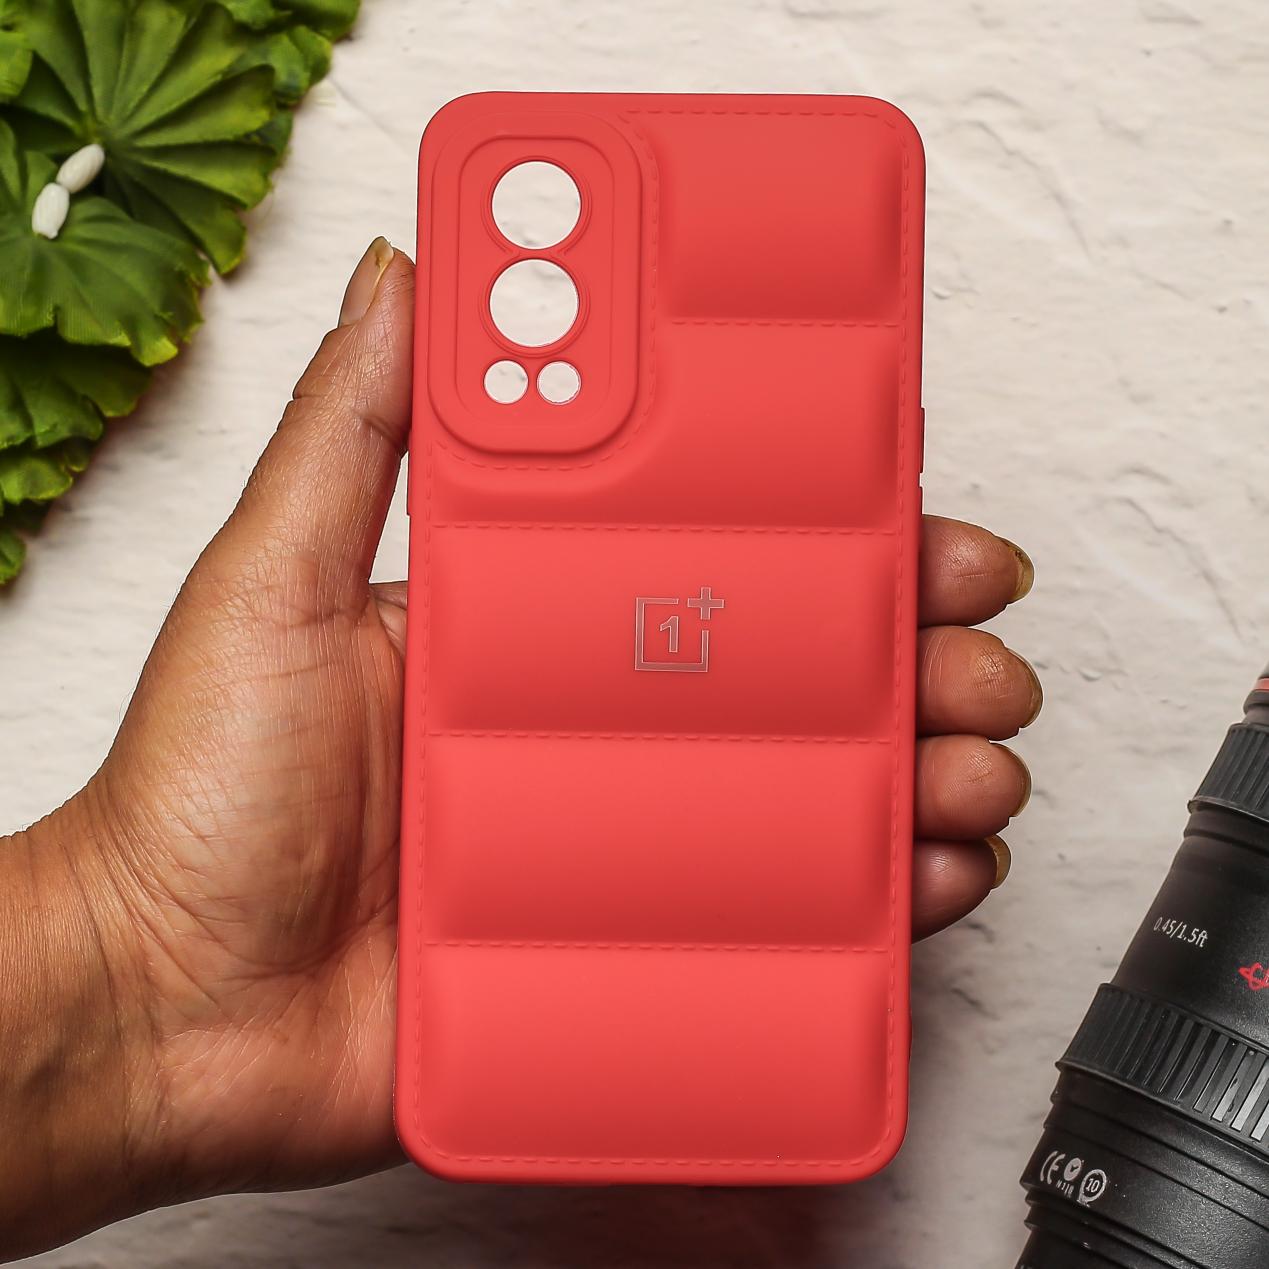 Red Puffon silicone case for Oneplus Nord 2